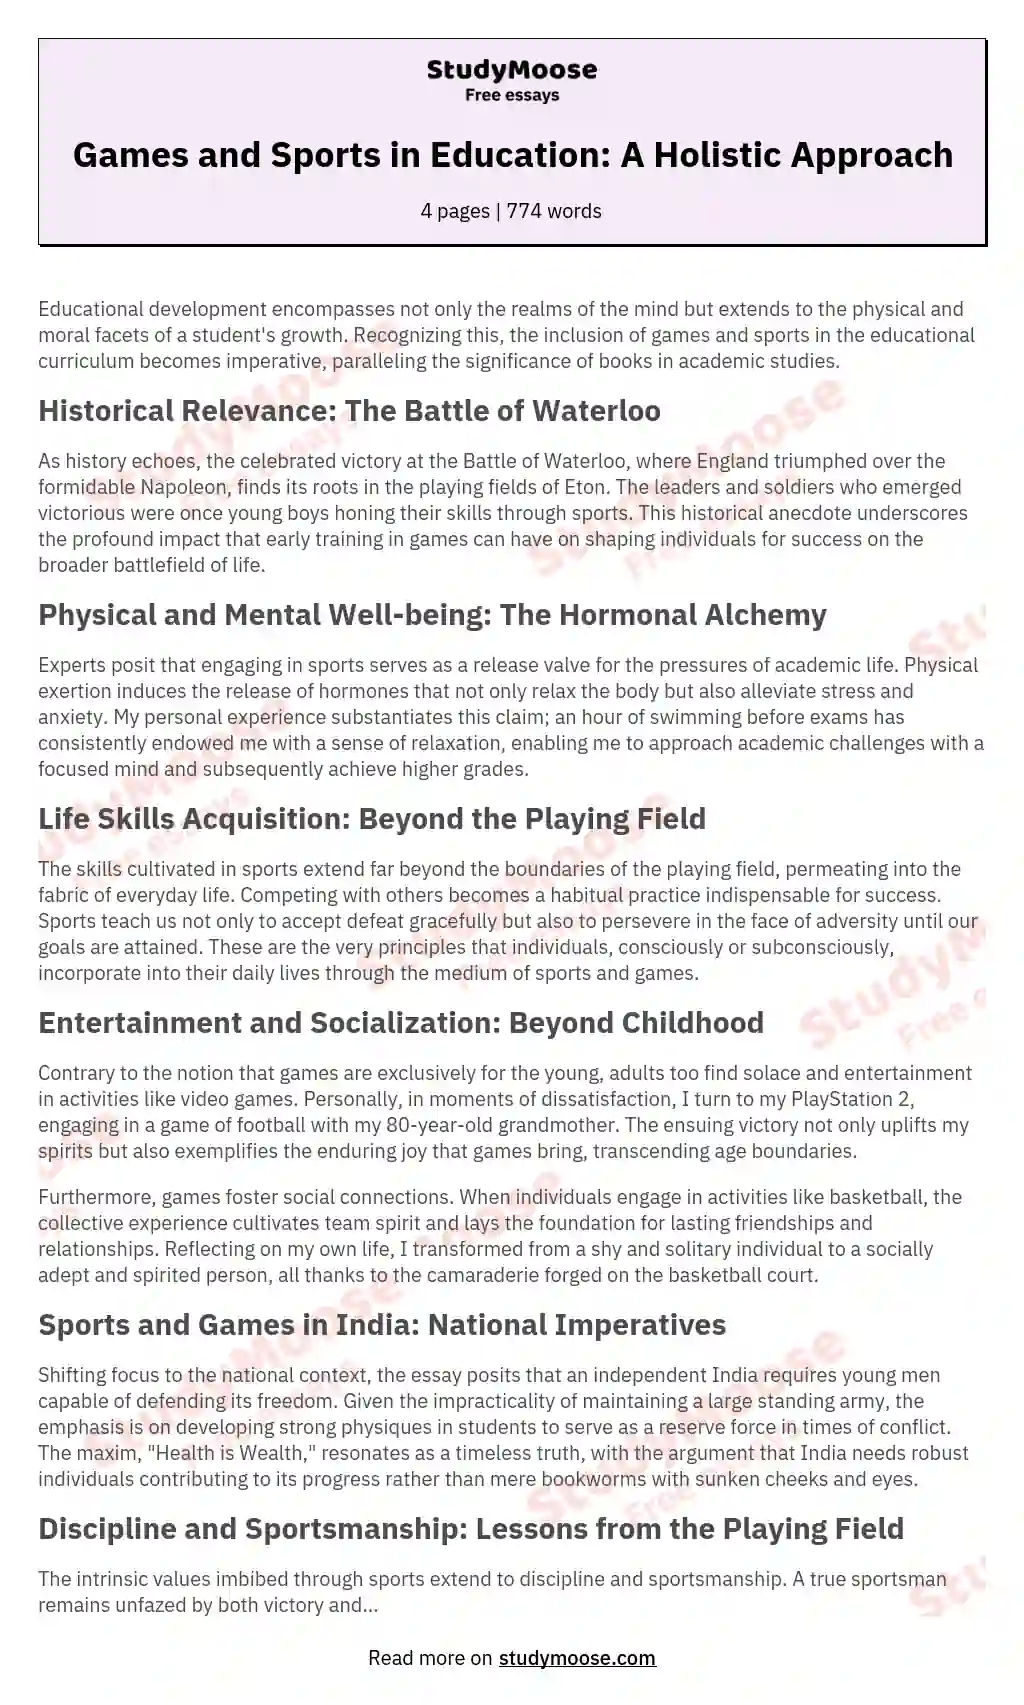 benefits of games and sports essay